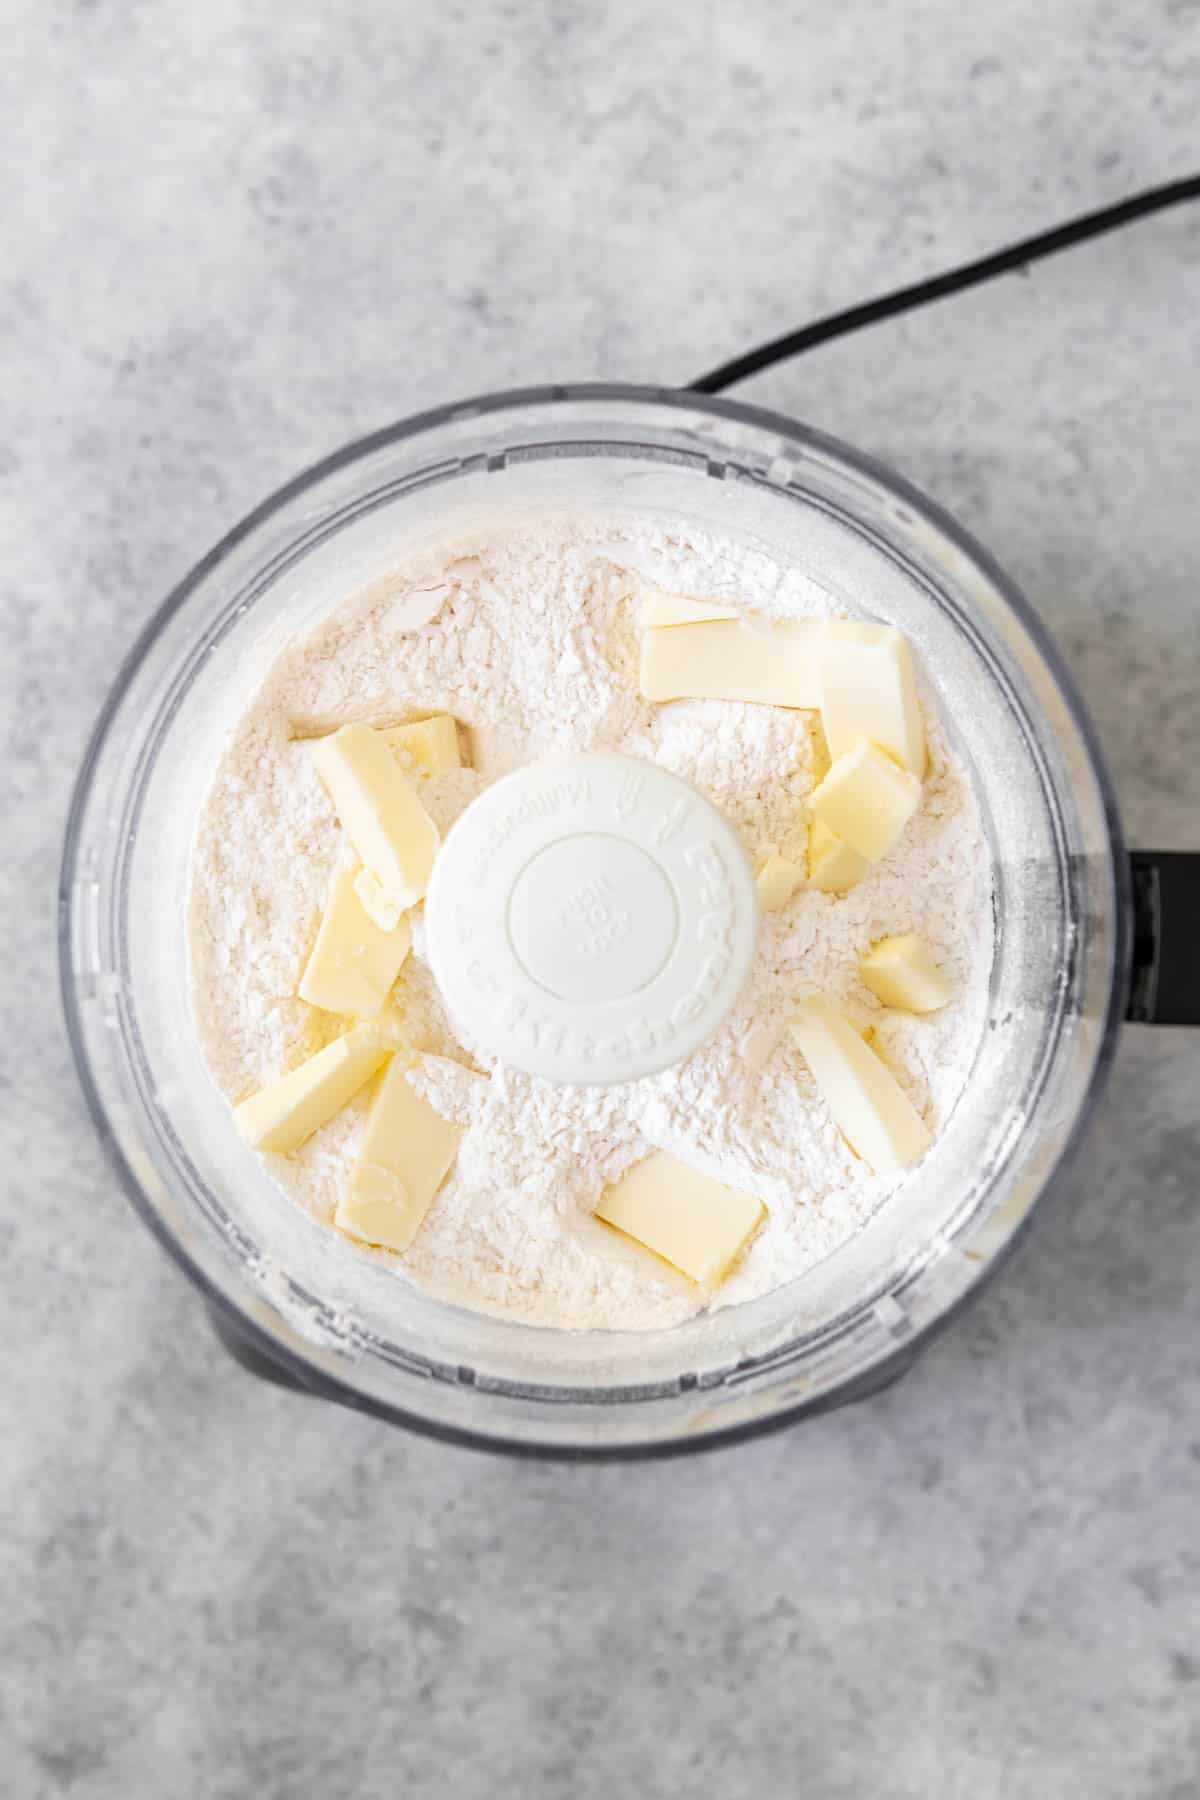 An image of cubed butter in the bowl of a food processor with flour and sugar for a sweet pastry crust for a French tart.